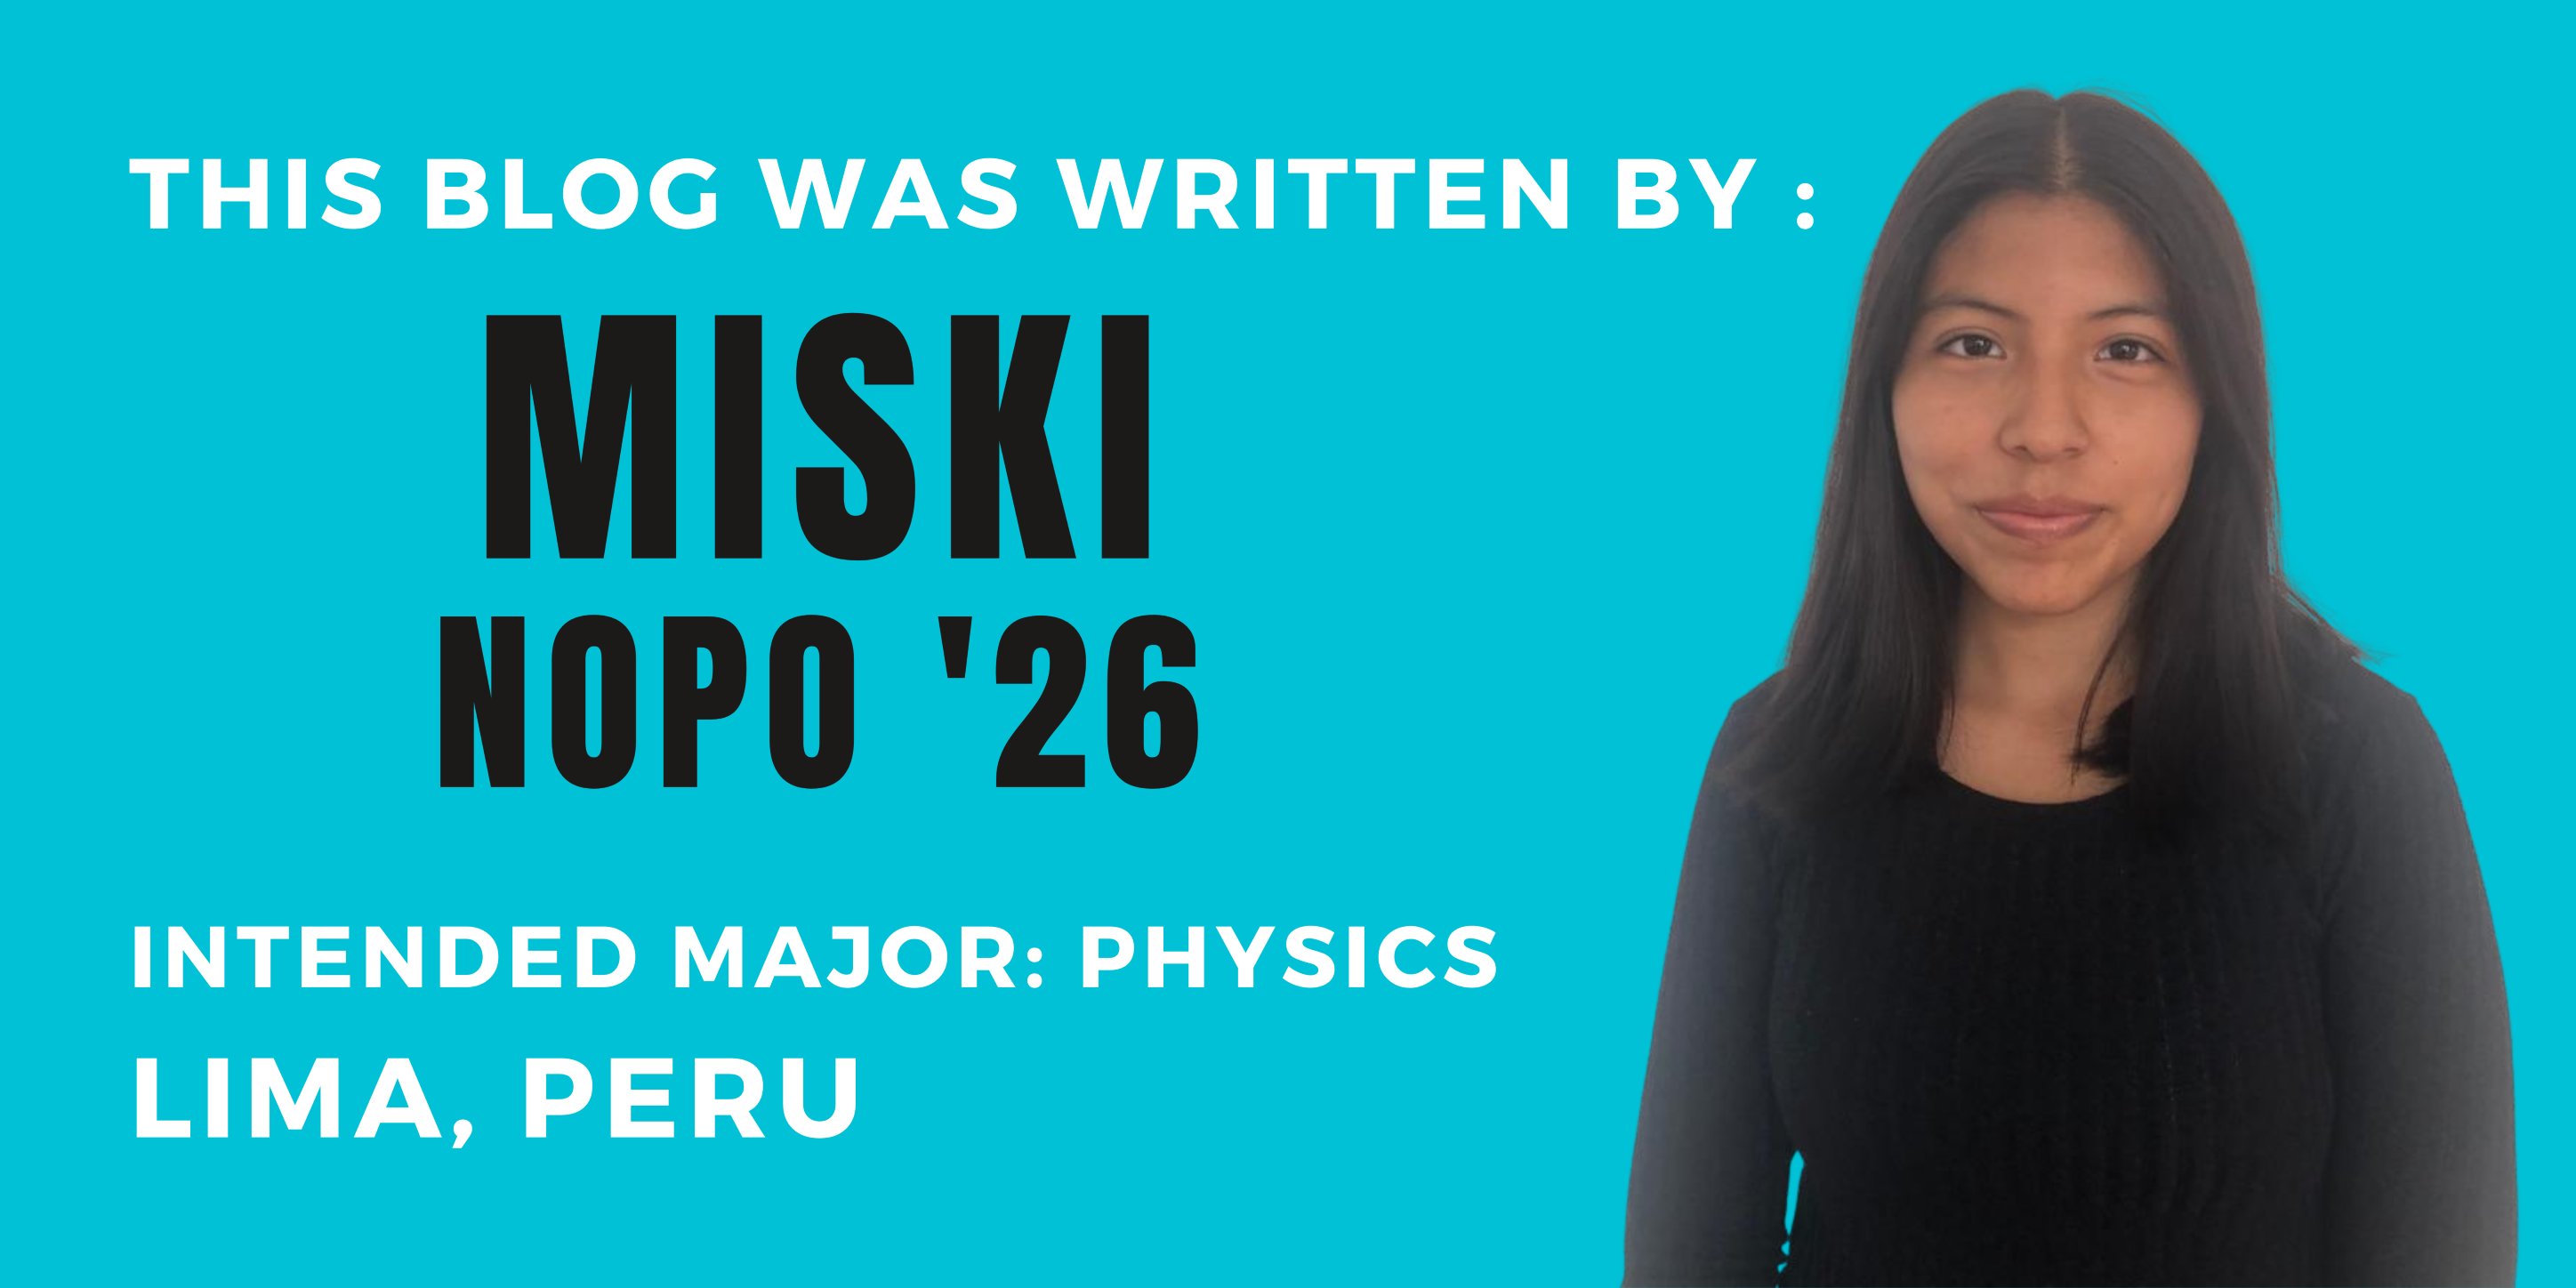 This blog was written by:  Miski Nopo '26. Intended major: physics. Lima, Peru.